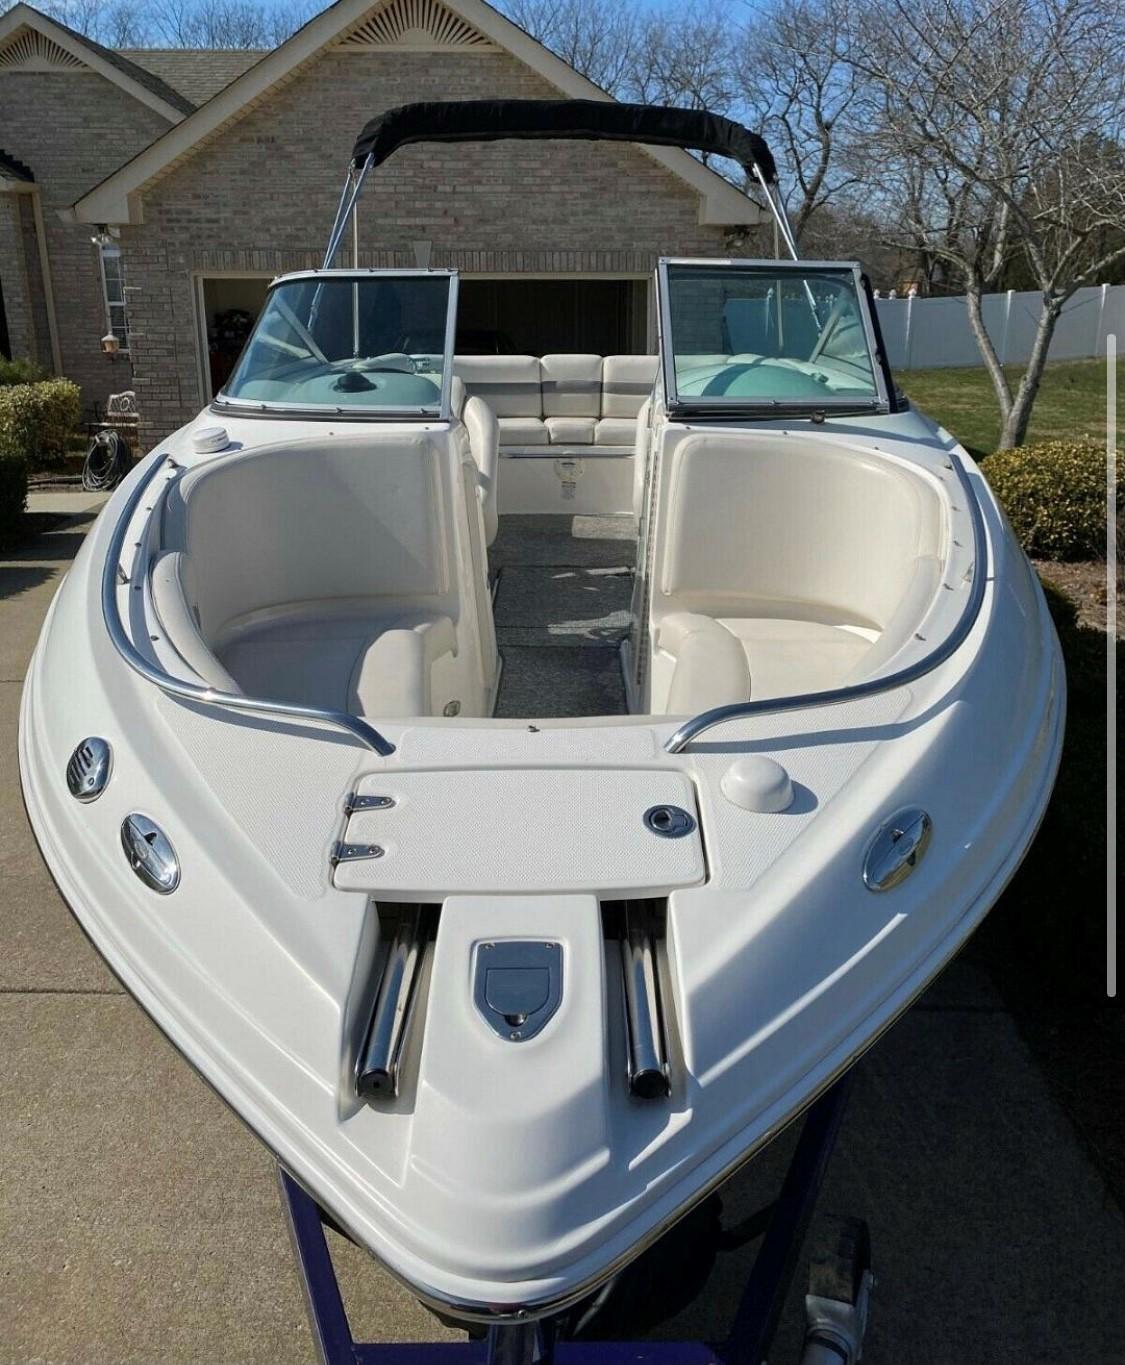 2007 Chaparral SSi 190 Bow Rider